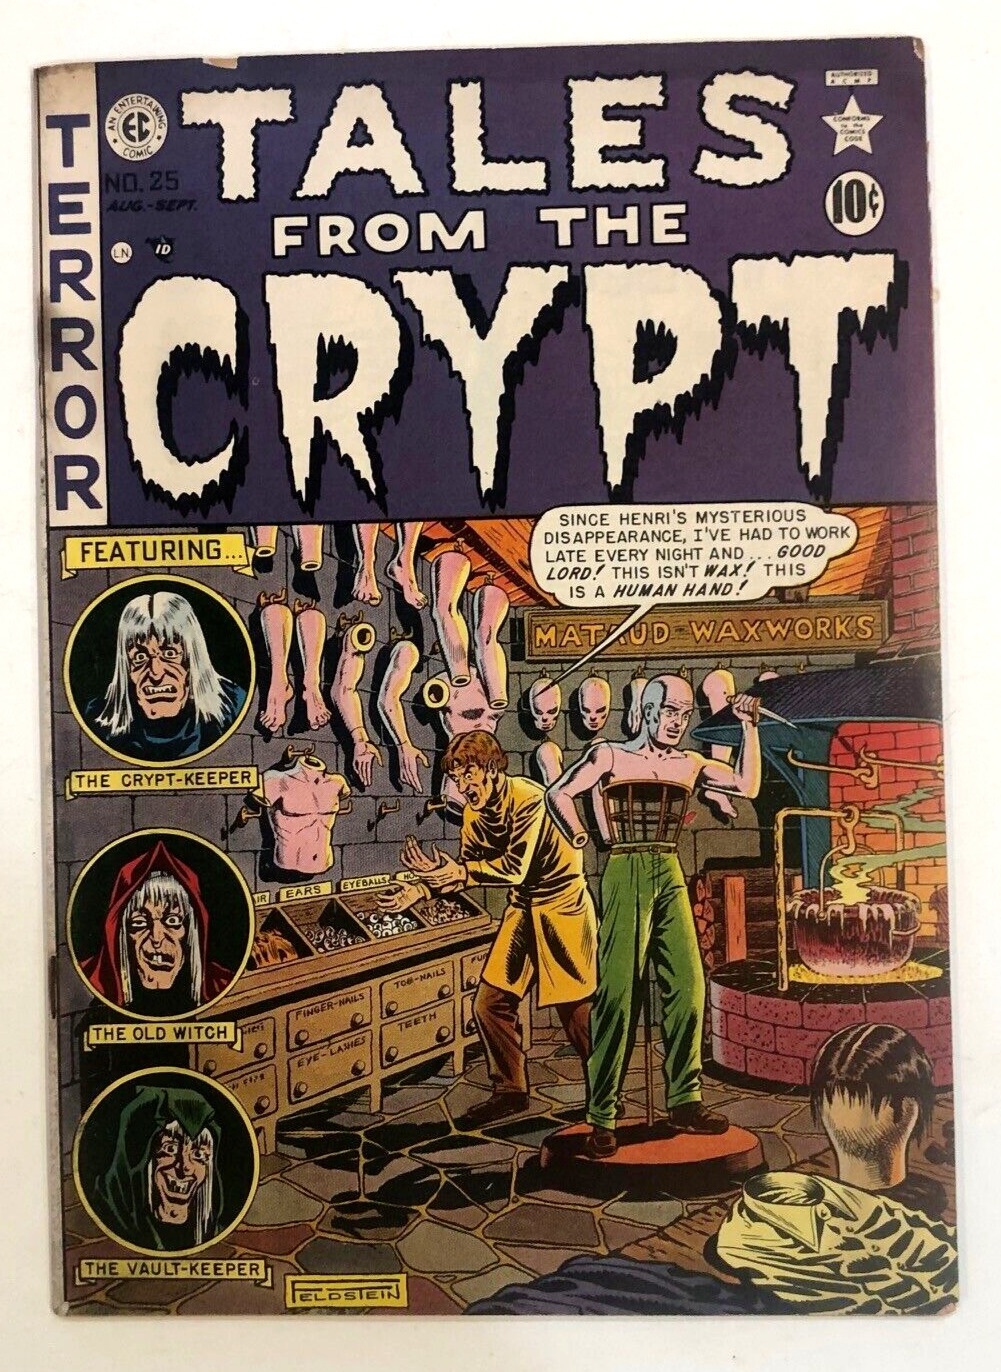 EC August 1951 Tales from the Crypt #25 Unrestored rare issue of an EC Classic